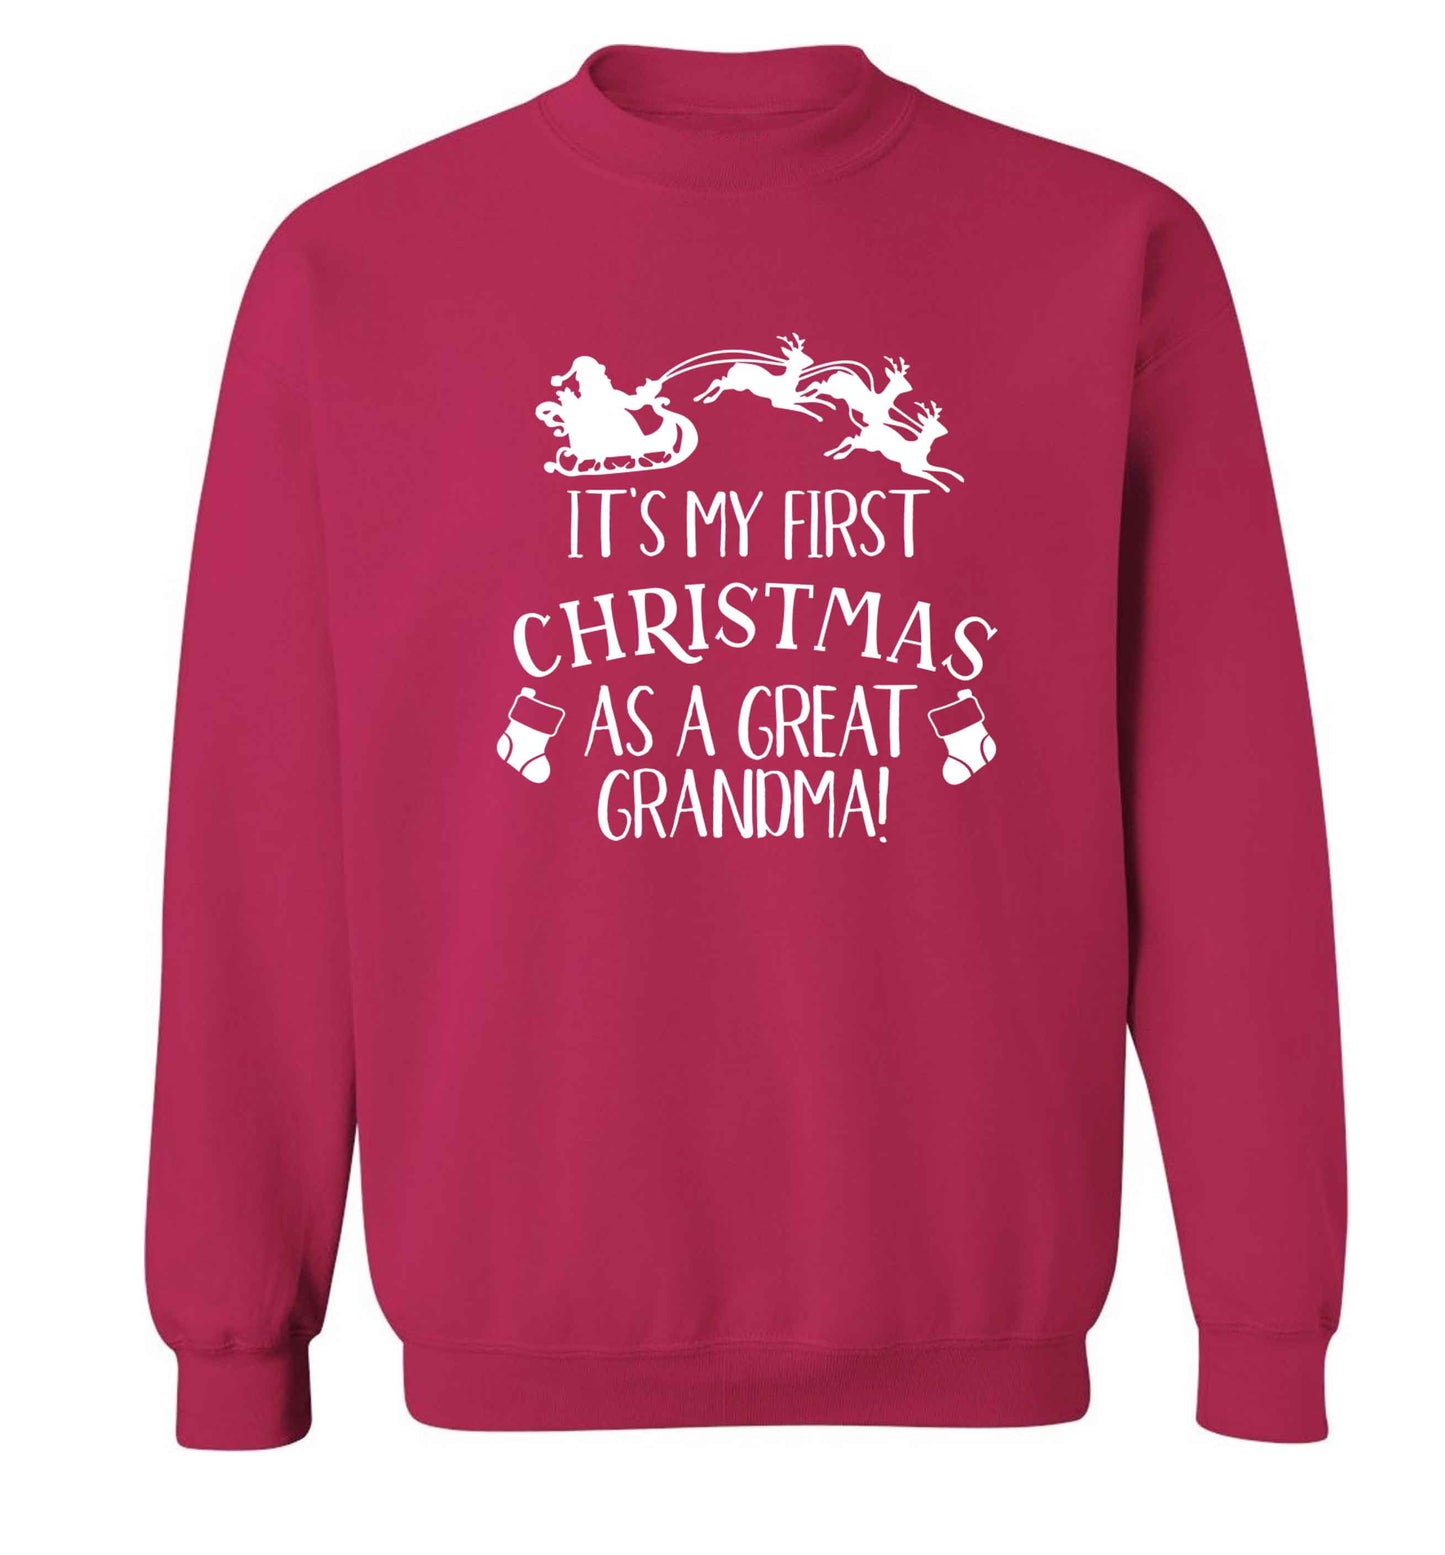 It's my first Christmas as a great grandma! Adult's unisex pink Sweater 2XL